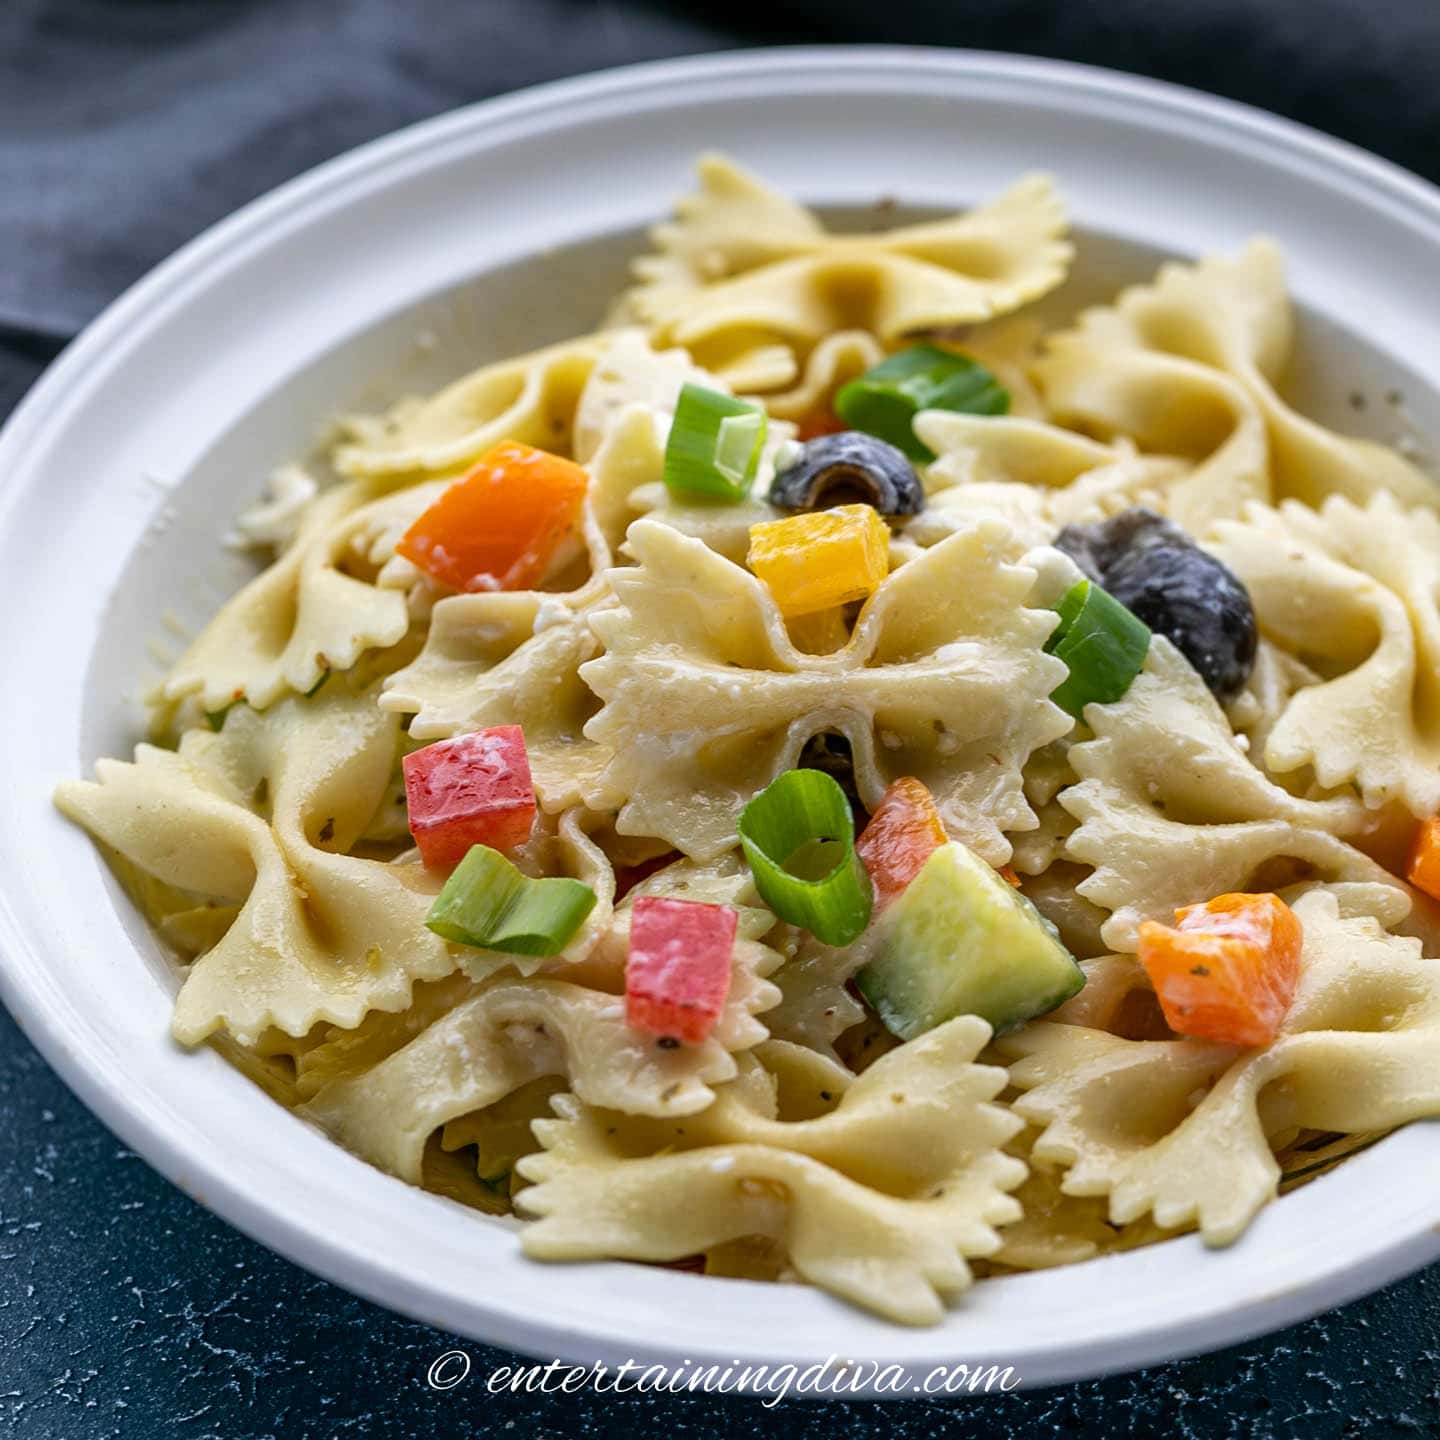 bow tie pasta salad with orange bell peppers, black olives, green onions, cucumbers and Italian dressing in a bowl